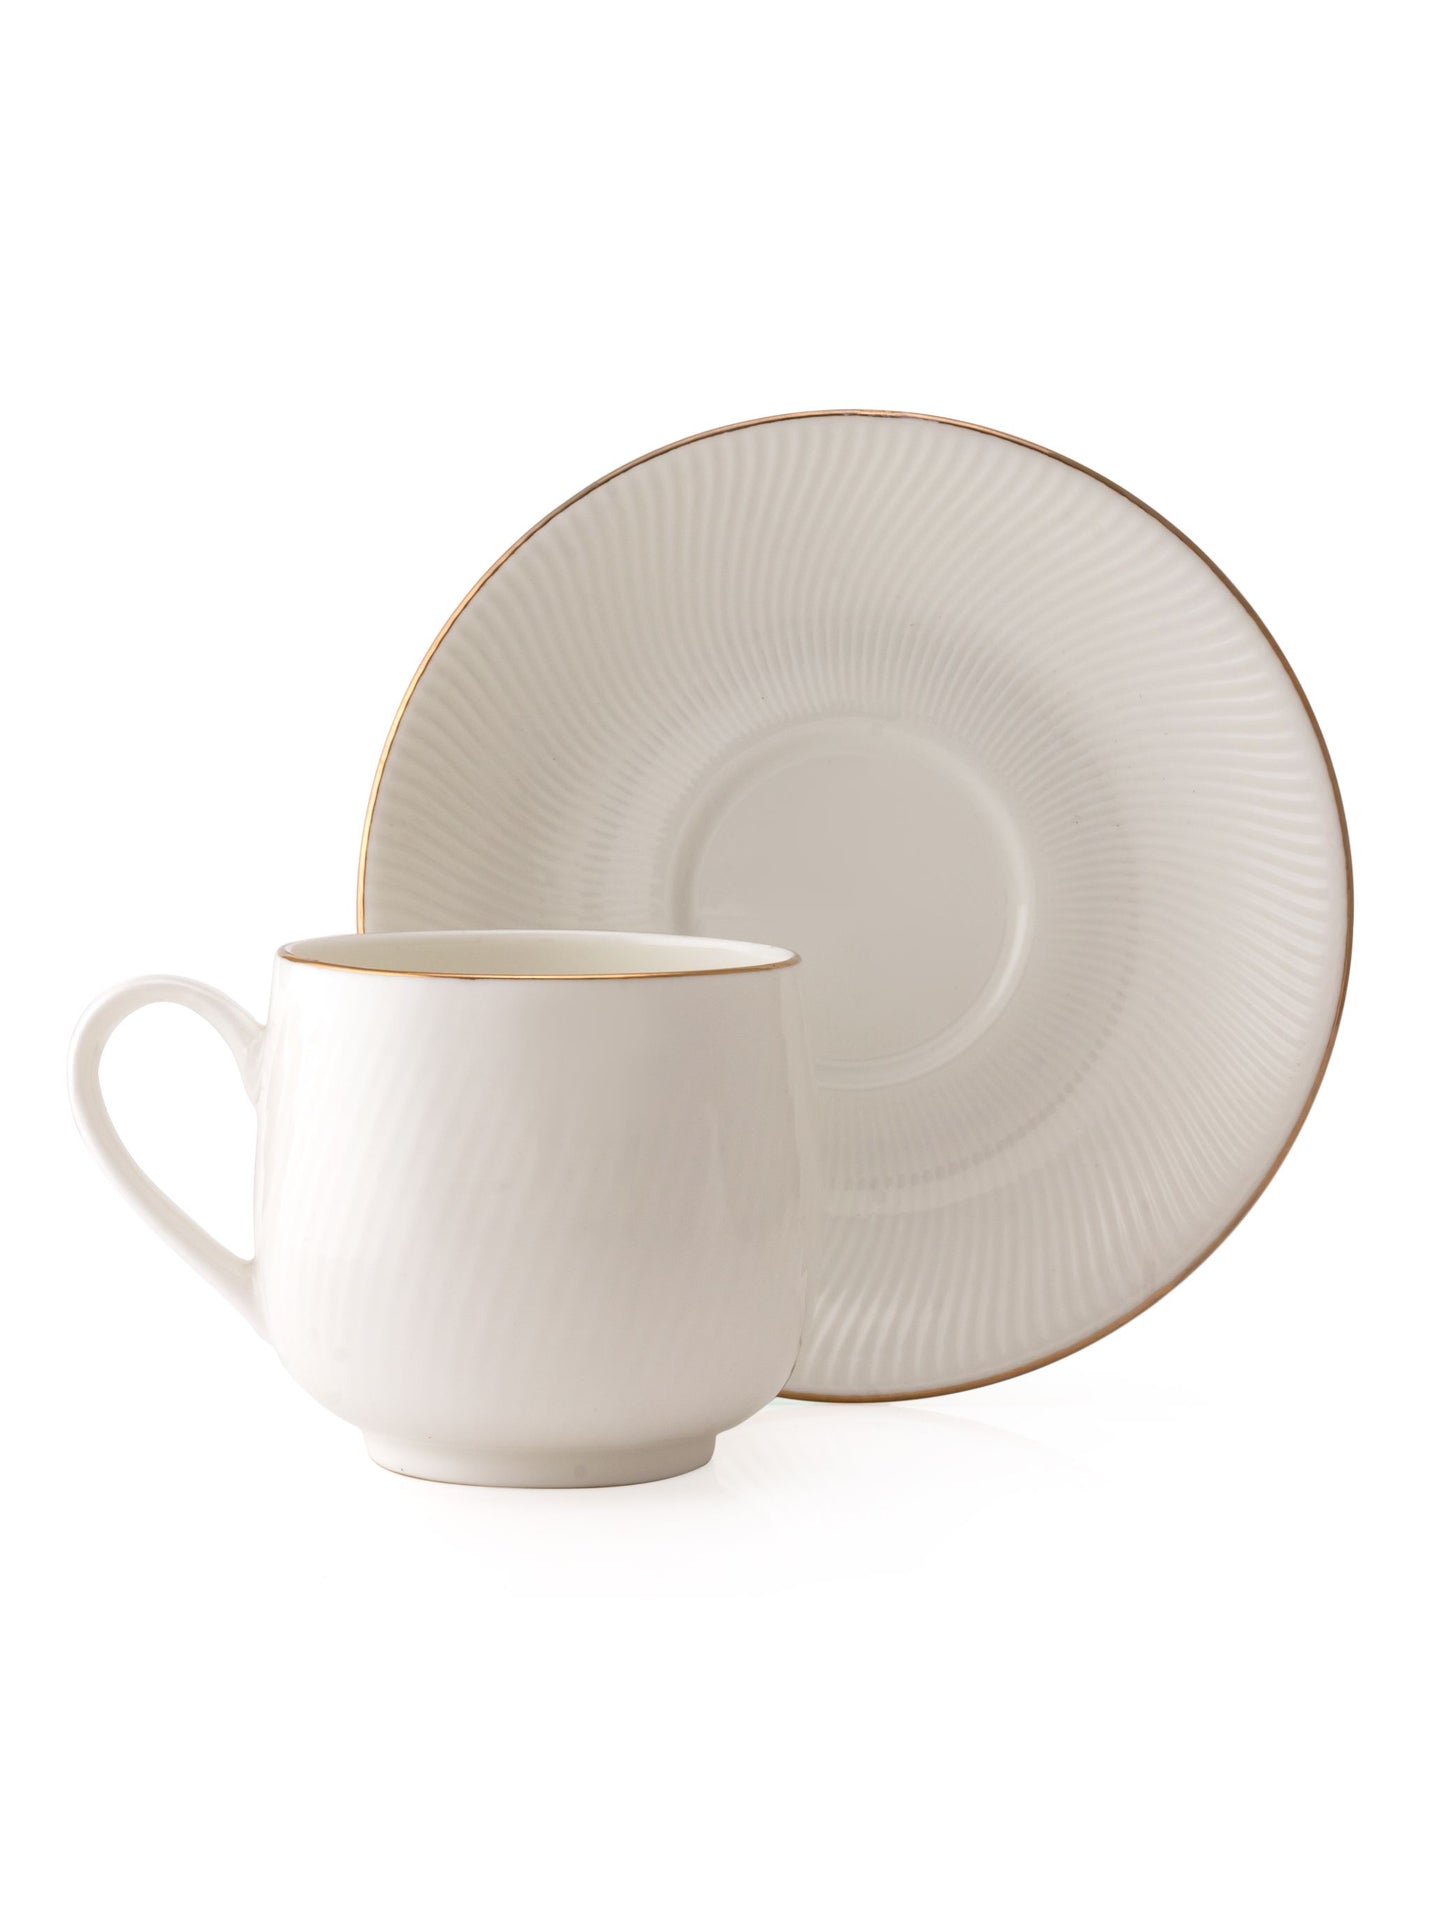 Twig Impression Cup & Saucer, 180ml, Set of 12 (6 Cups + 6 Saucers) (1101)